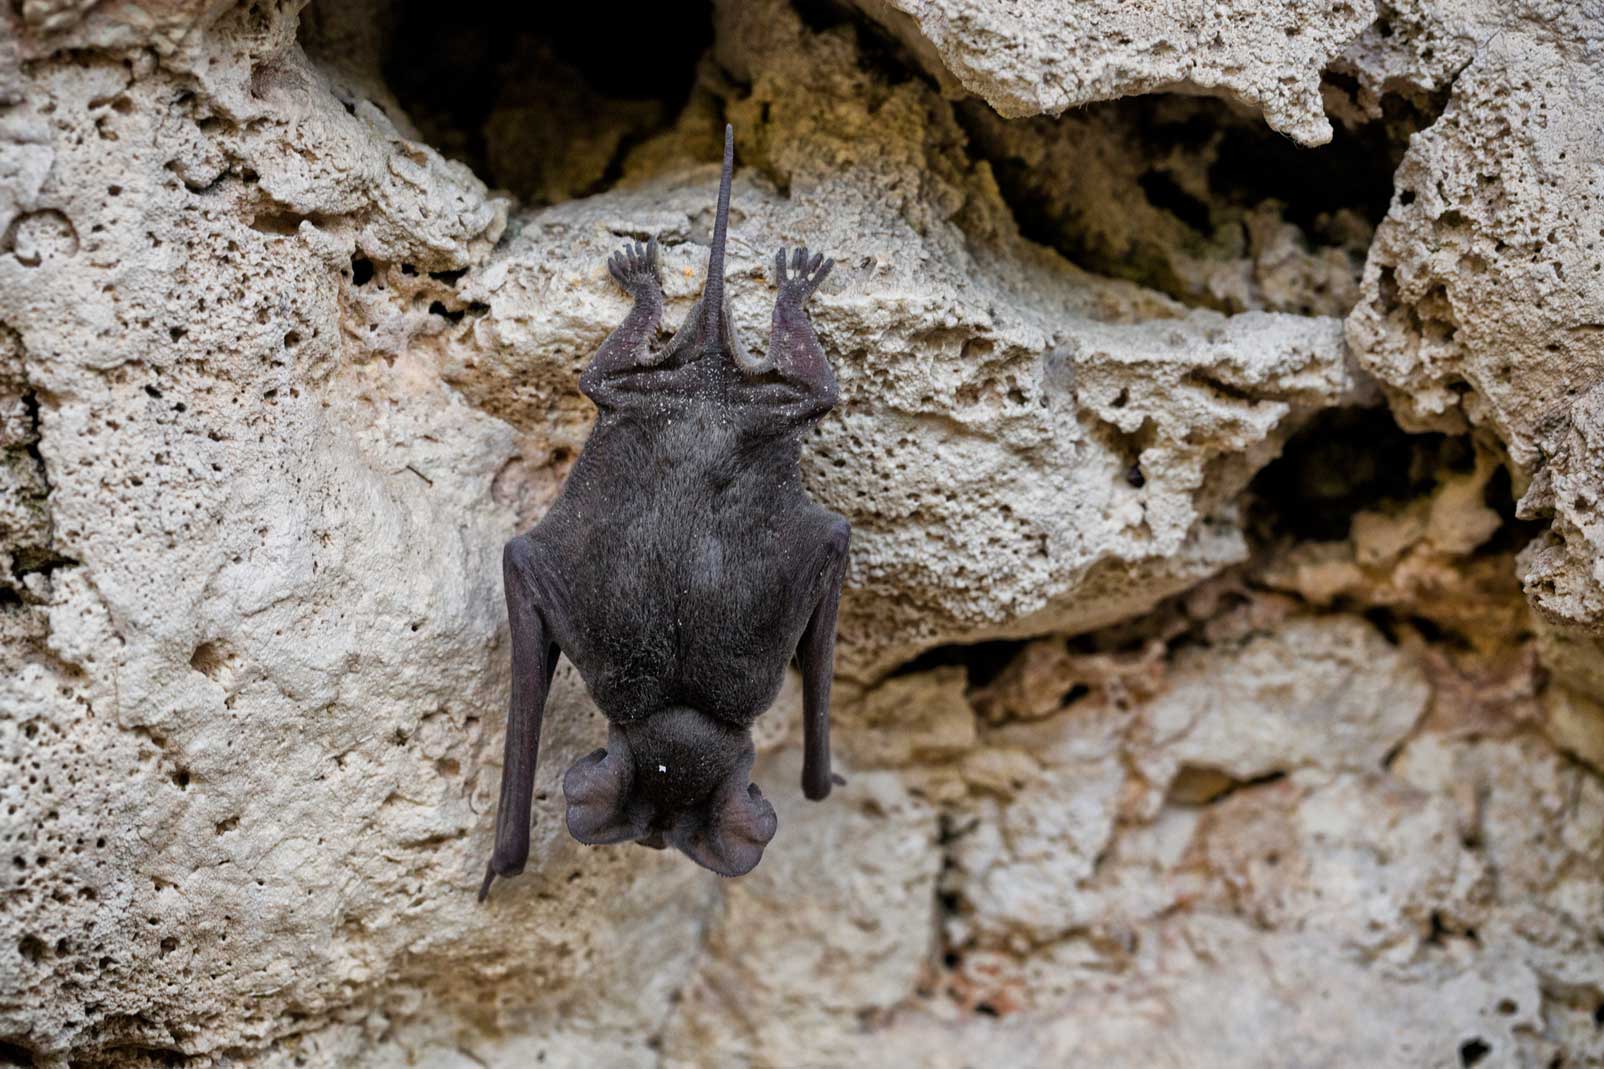 Aigner says bats get a “bad rap” that they don’t deserve. “I’d never been this close to them and had that close up view of them,” she says. “They’re really cute...they’re really one of nature’s miracles.” Photo © Karine Aigner